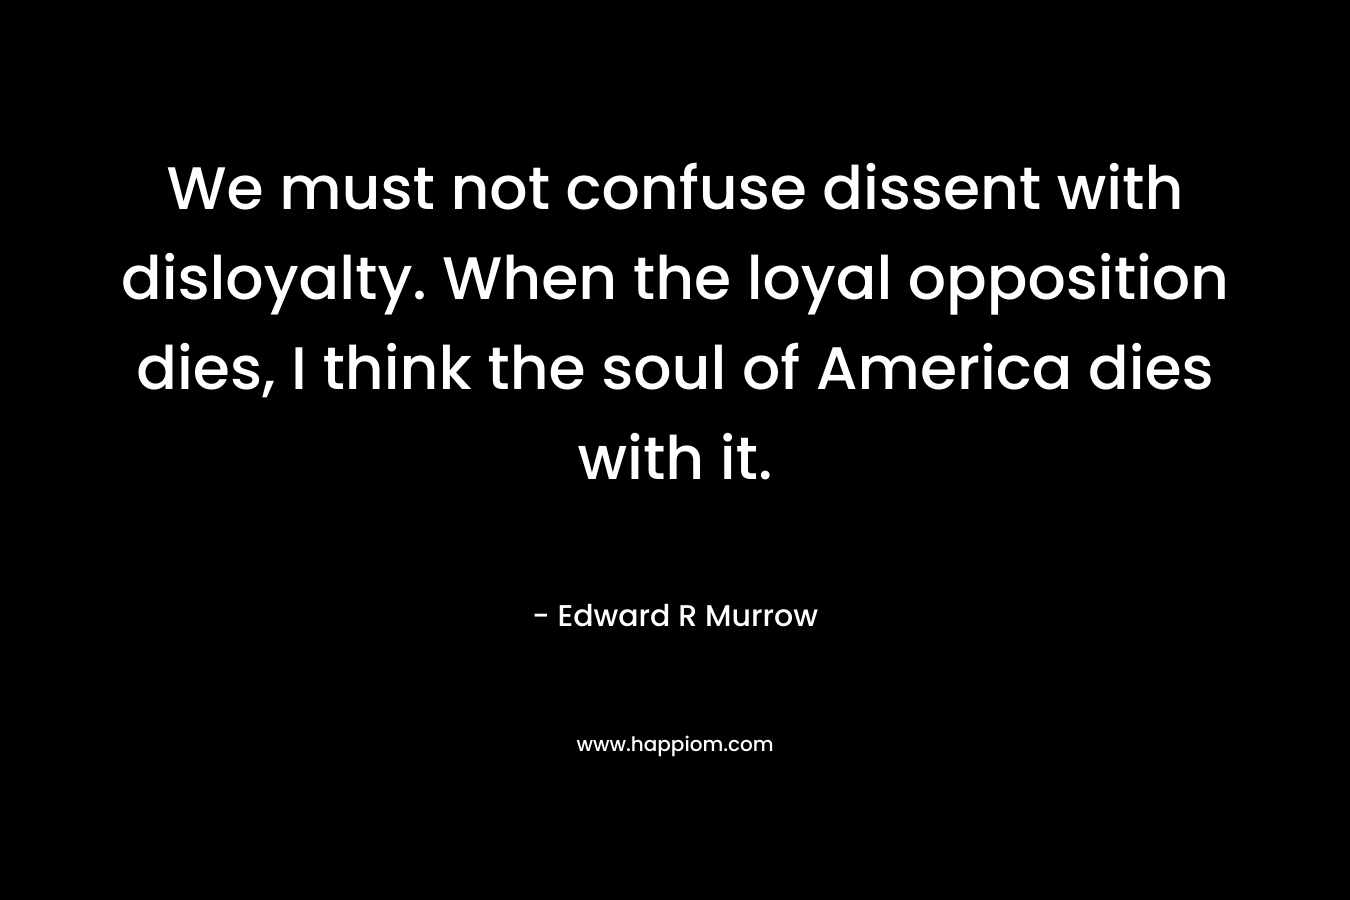 We must not confuse dissent with disloyalty. When the loyal opposition dies, I think the soul of America dies with it. – Edward R Murrow